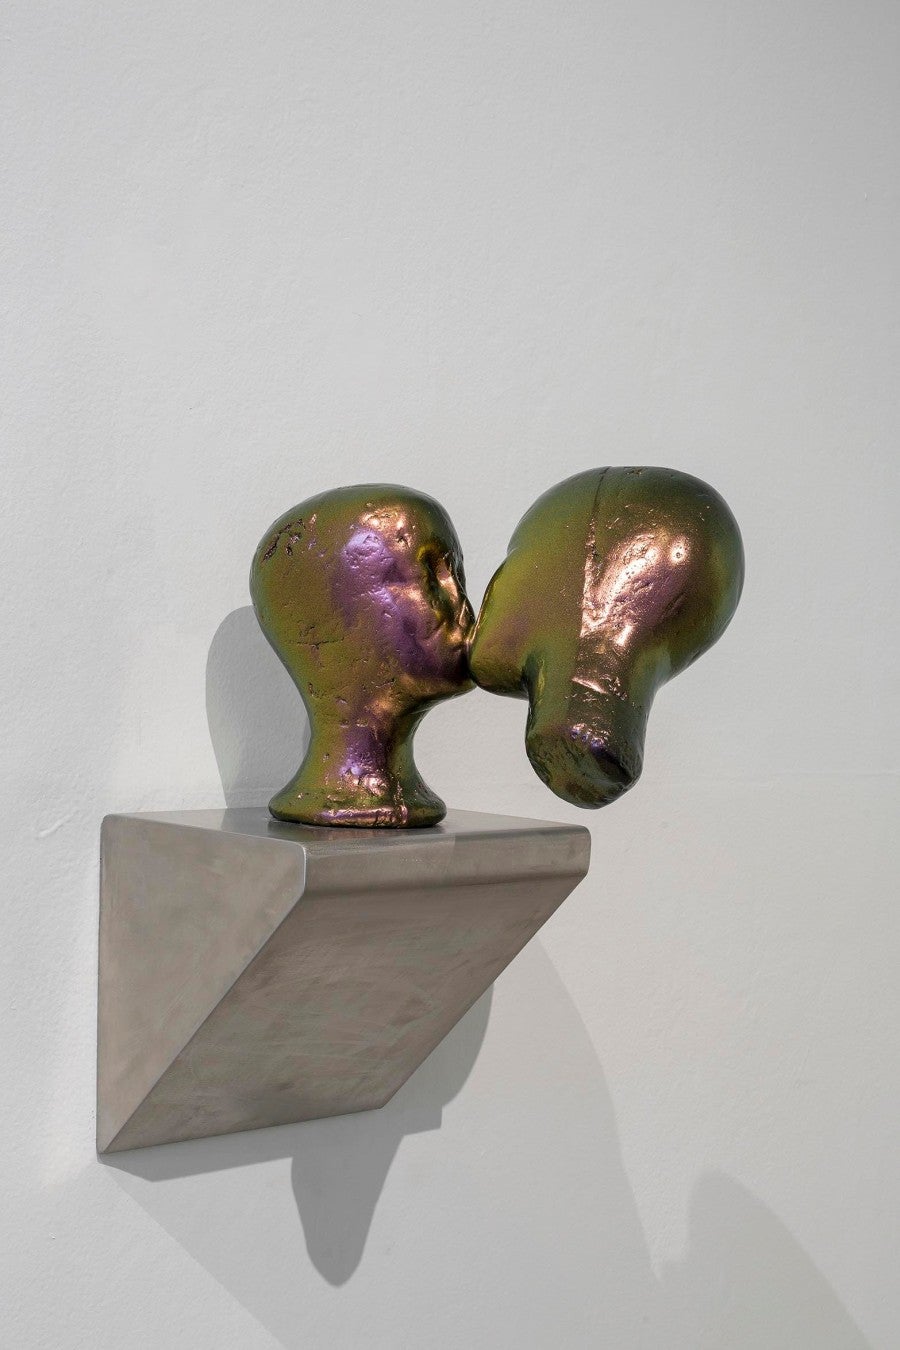 Guillaume Leblon, Harlem kiss, 2017, bronze, iridescent paint and stainless steel, 52x40cm. Exhibition view, Aerosol, 2019 at Labor, Mexico.